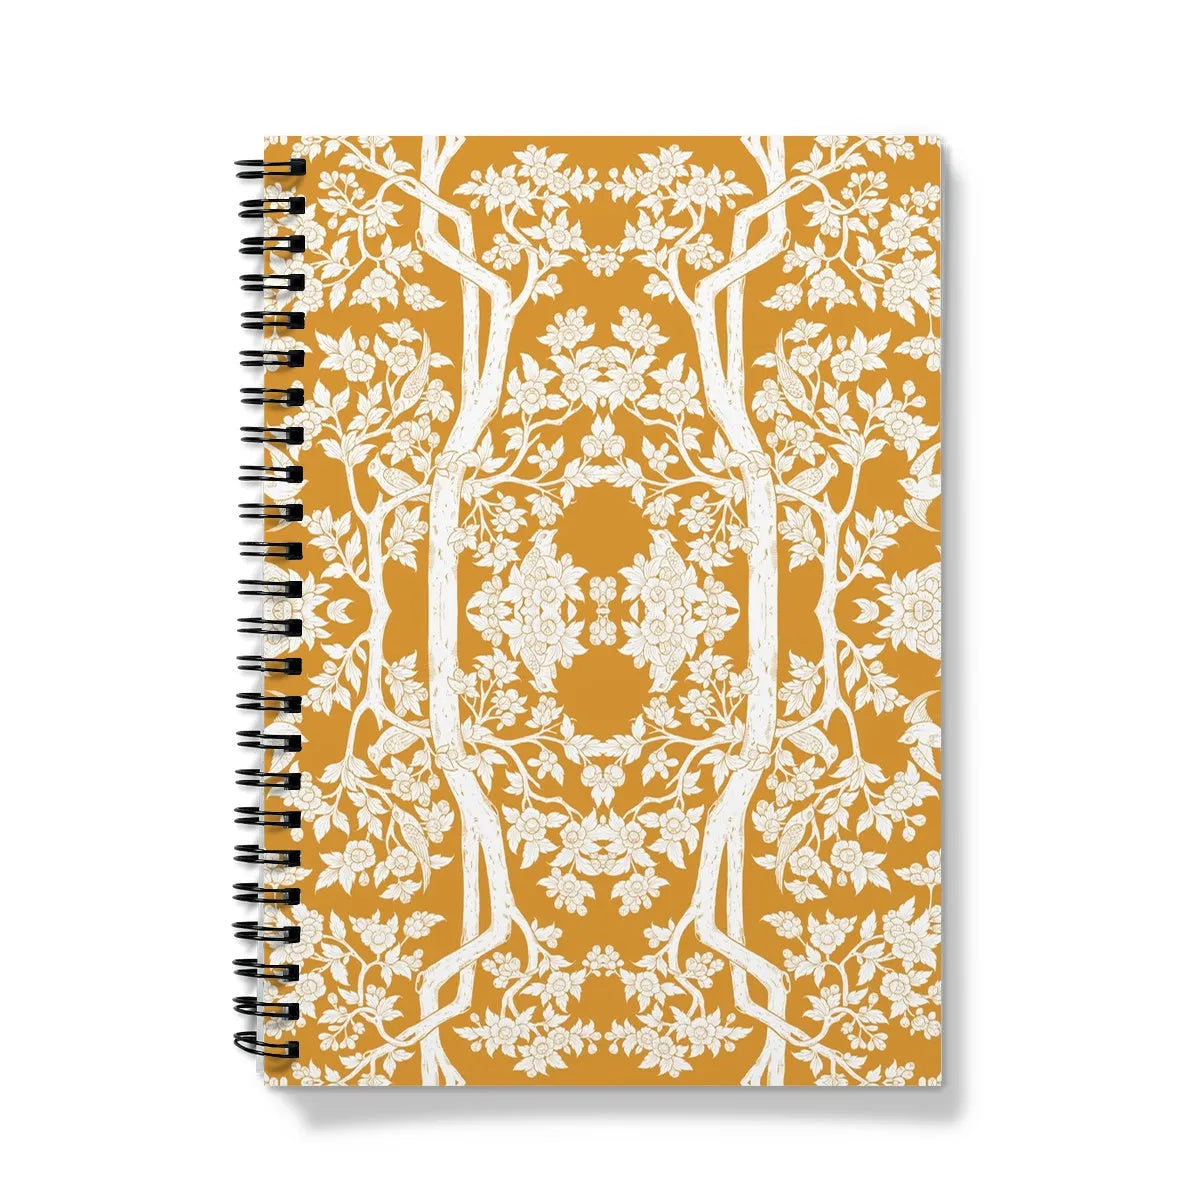 Aviary Orange Notebook - A5 - Graph Paper - Notebooks & Notepads - Aesthetic Art